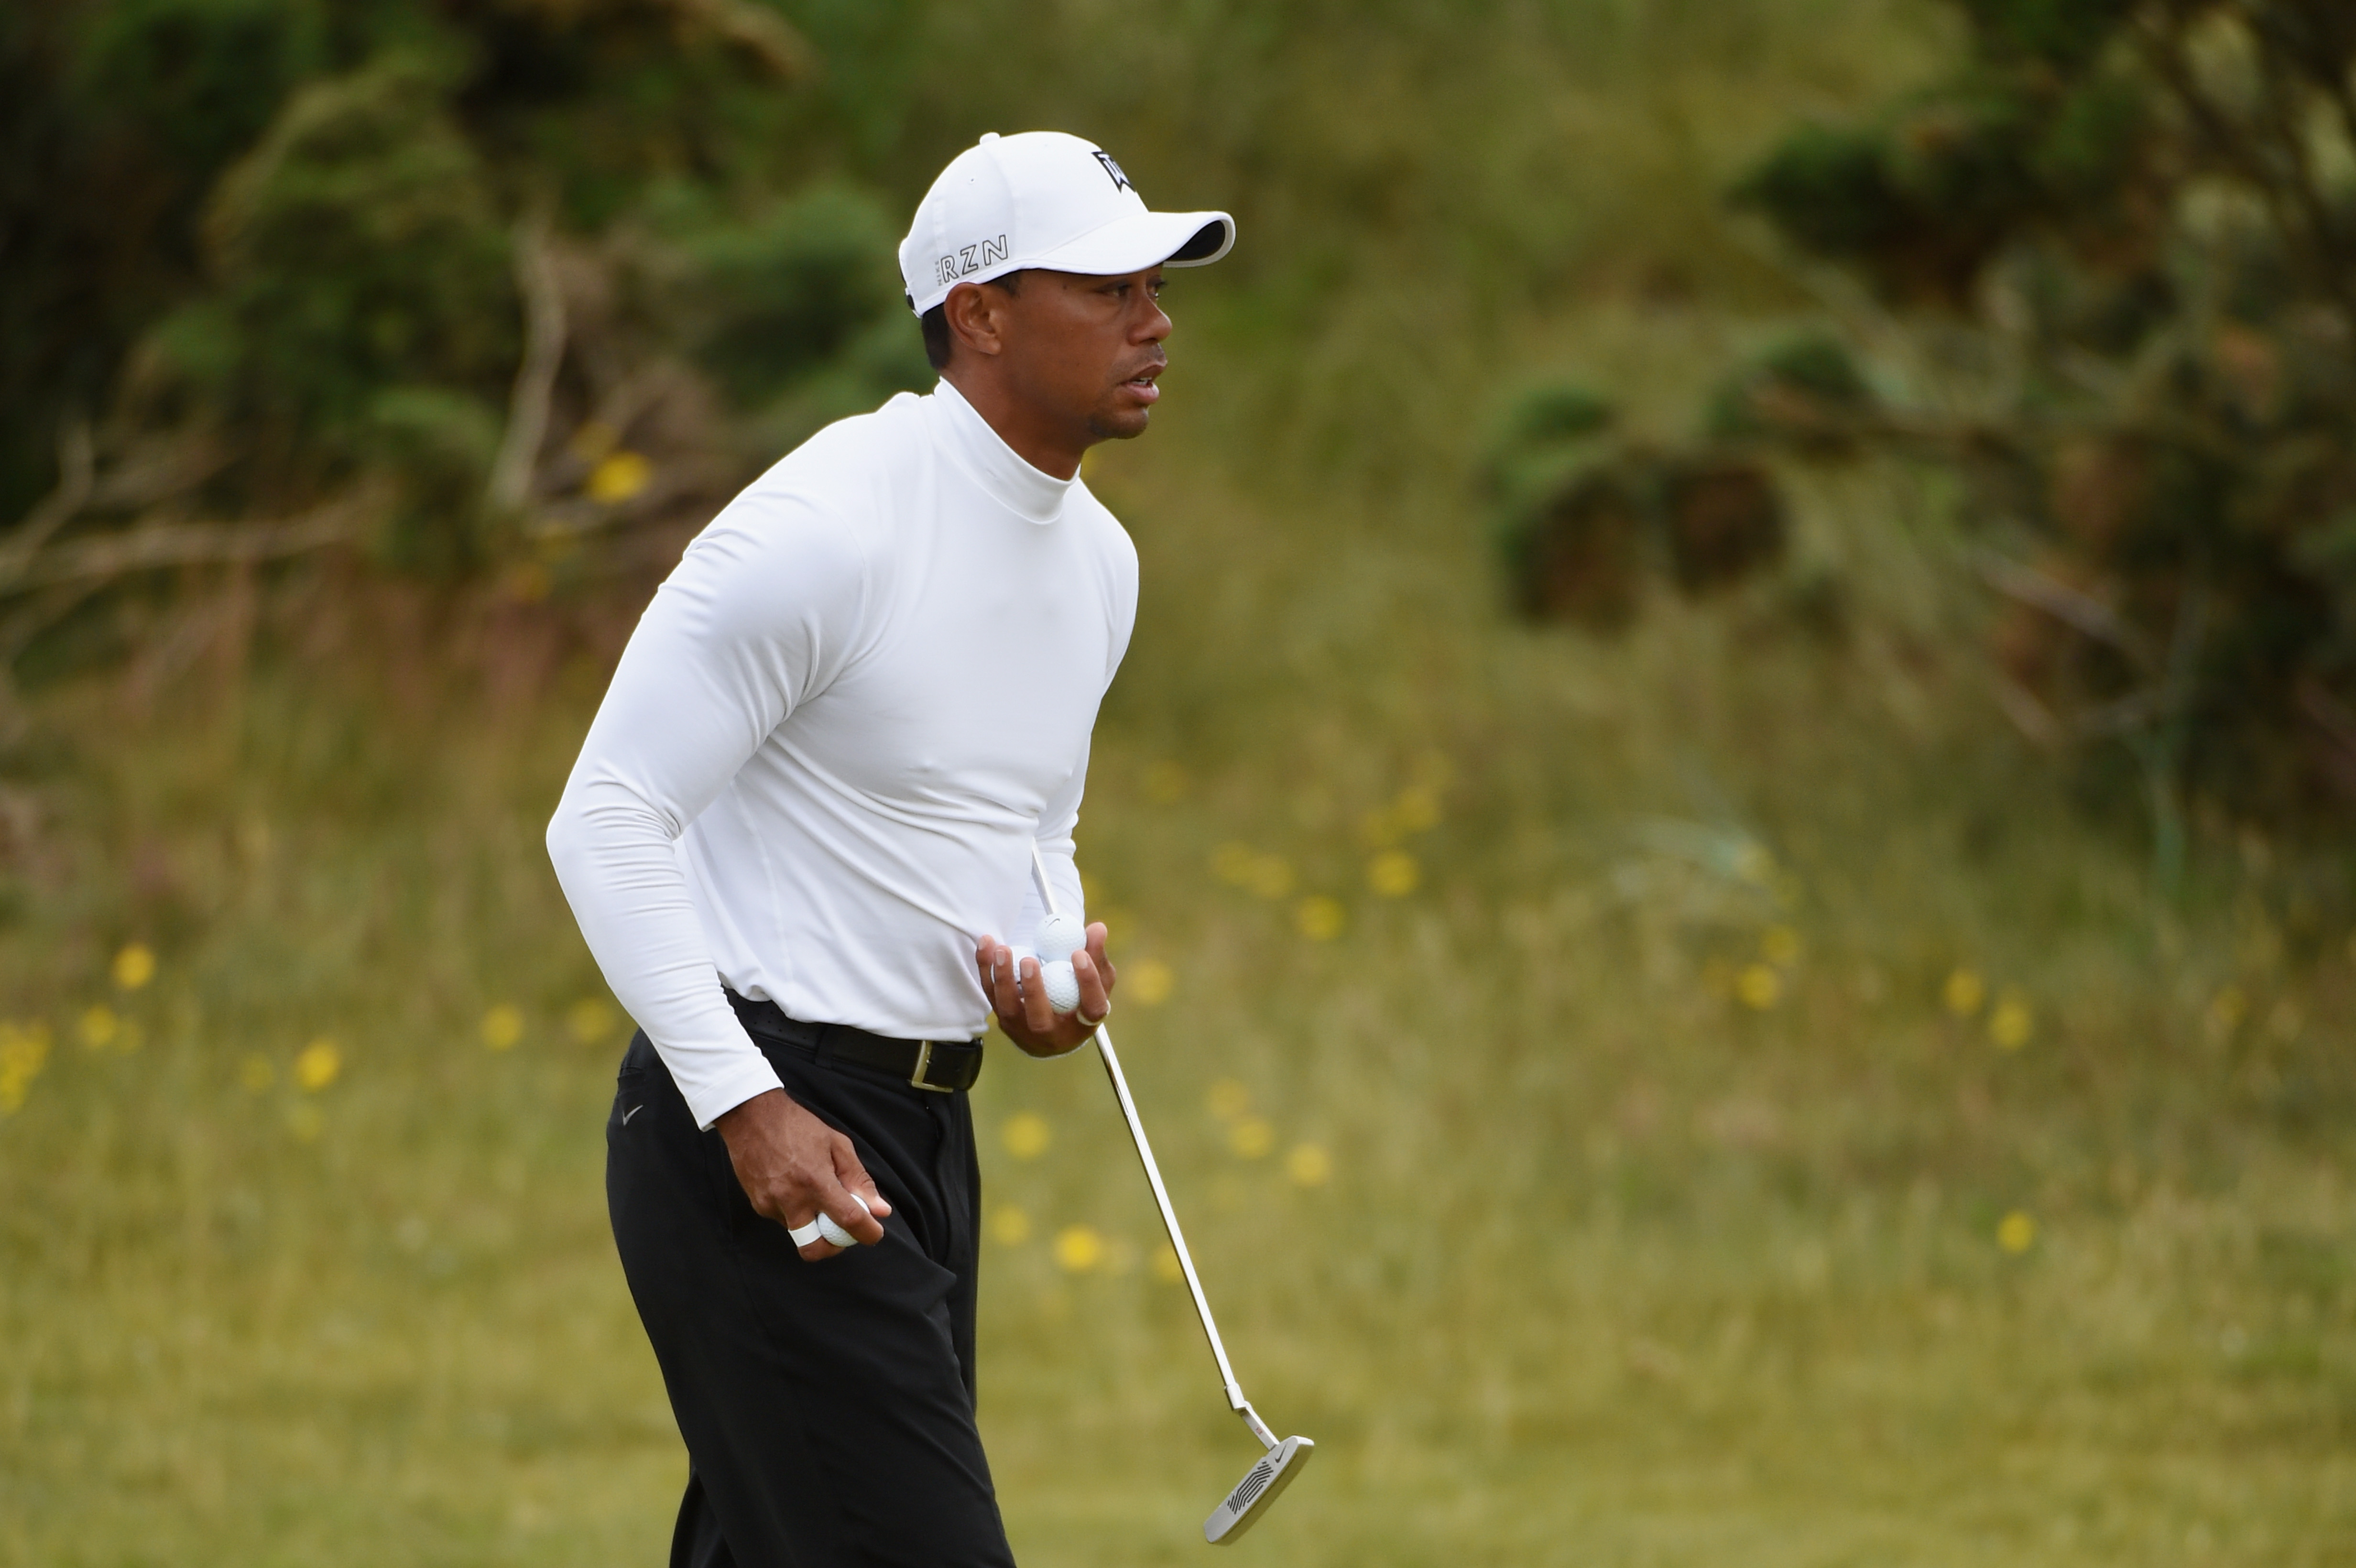 Tiger 'excited' to be back at St. Andrews - Newsfeed